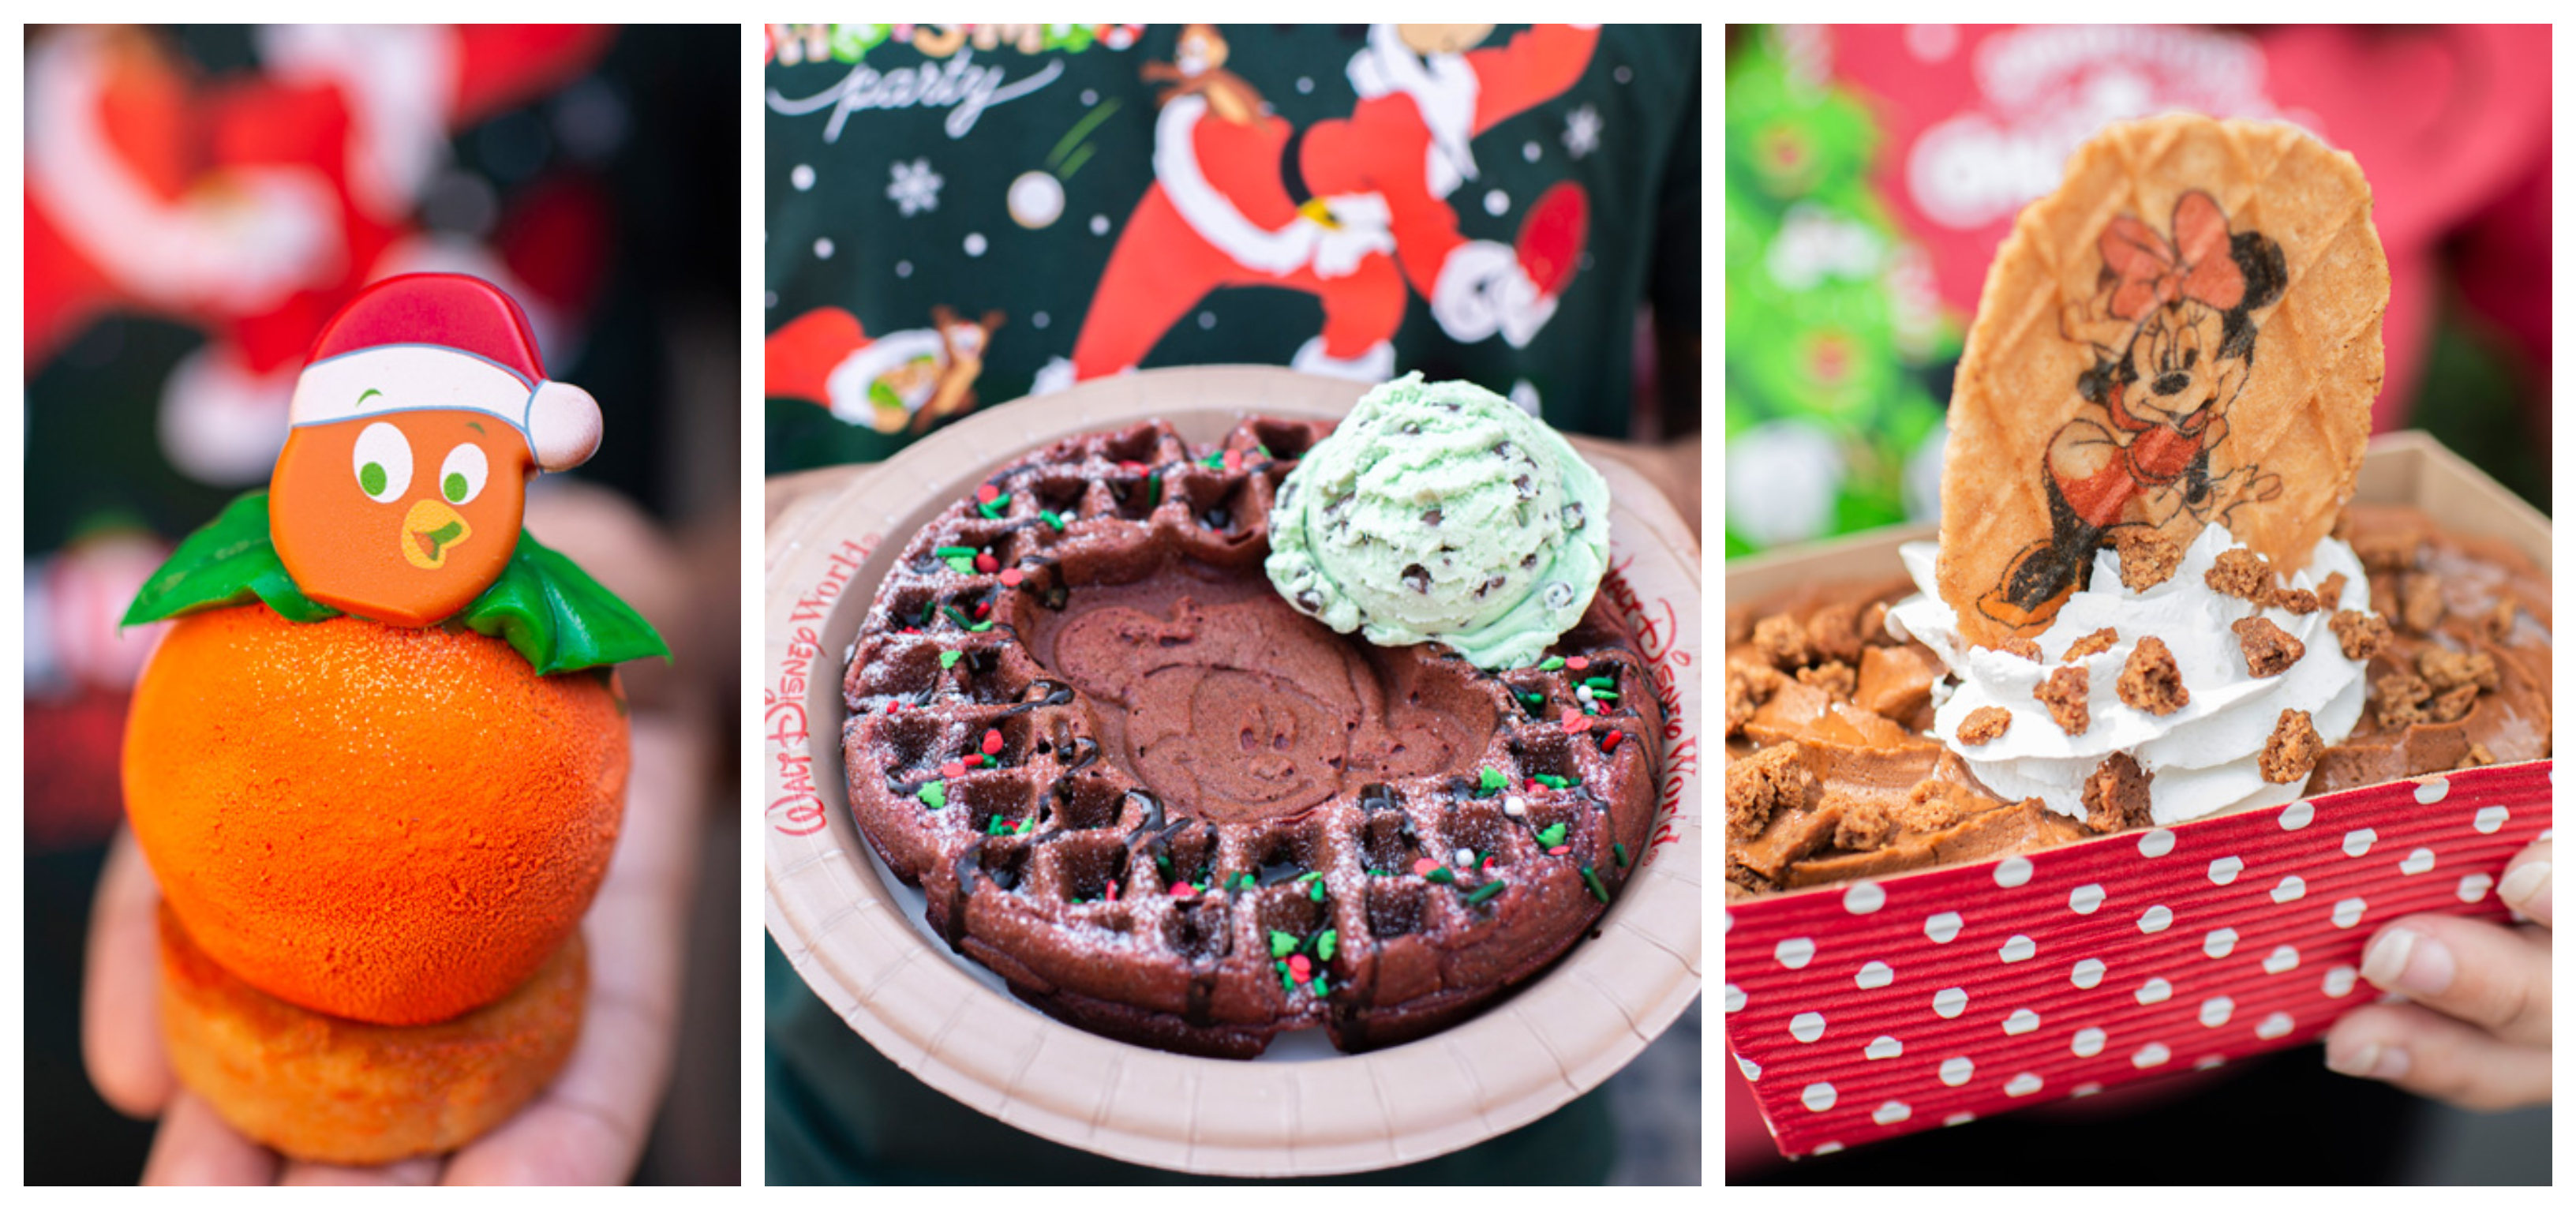 Sneak Peek of the Foods of Mickey’s Very Merry Christmas Party